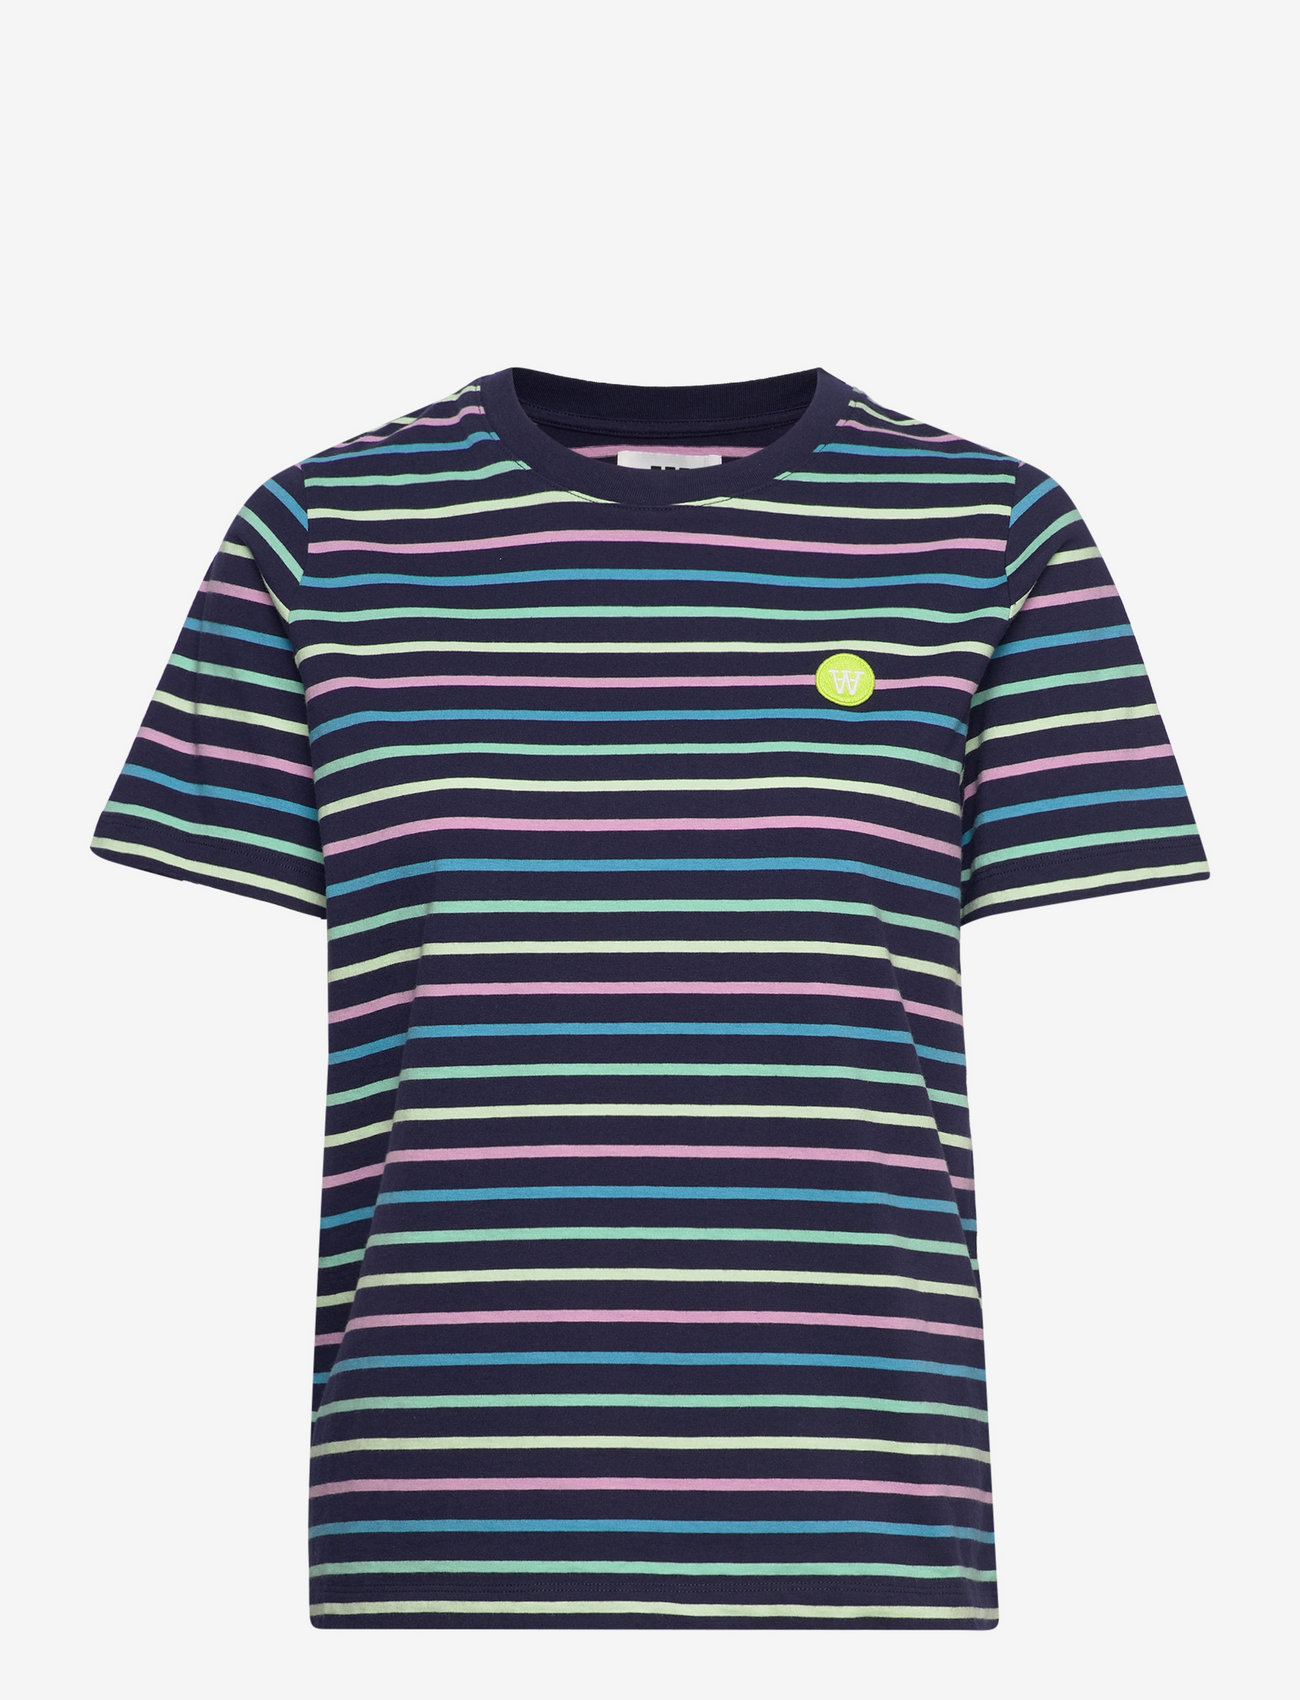 Double A by Wood Wood - Mia stripe T-shirt - t-shirts & tops - navy stripes - 0